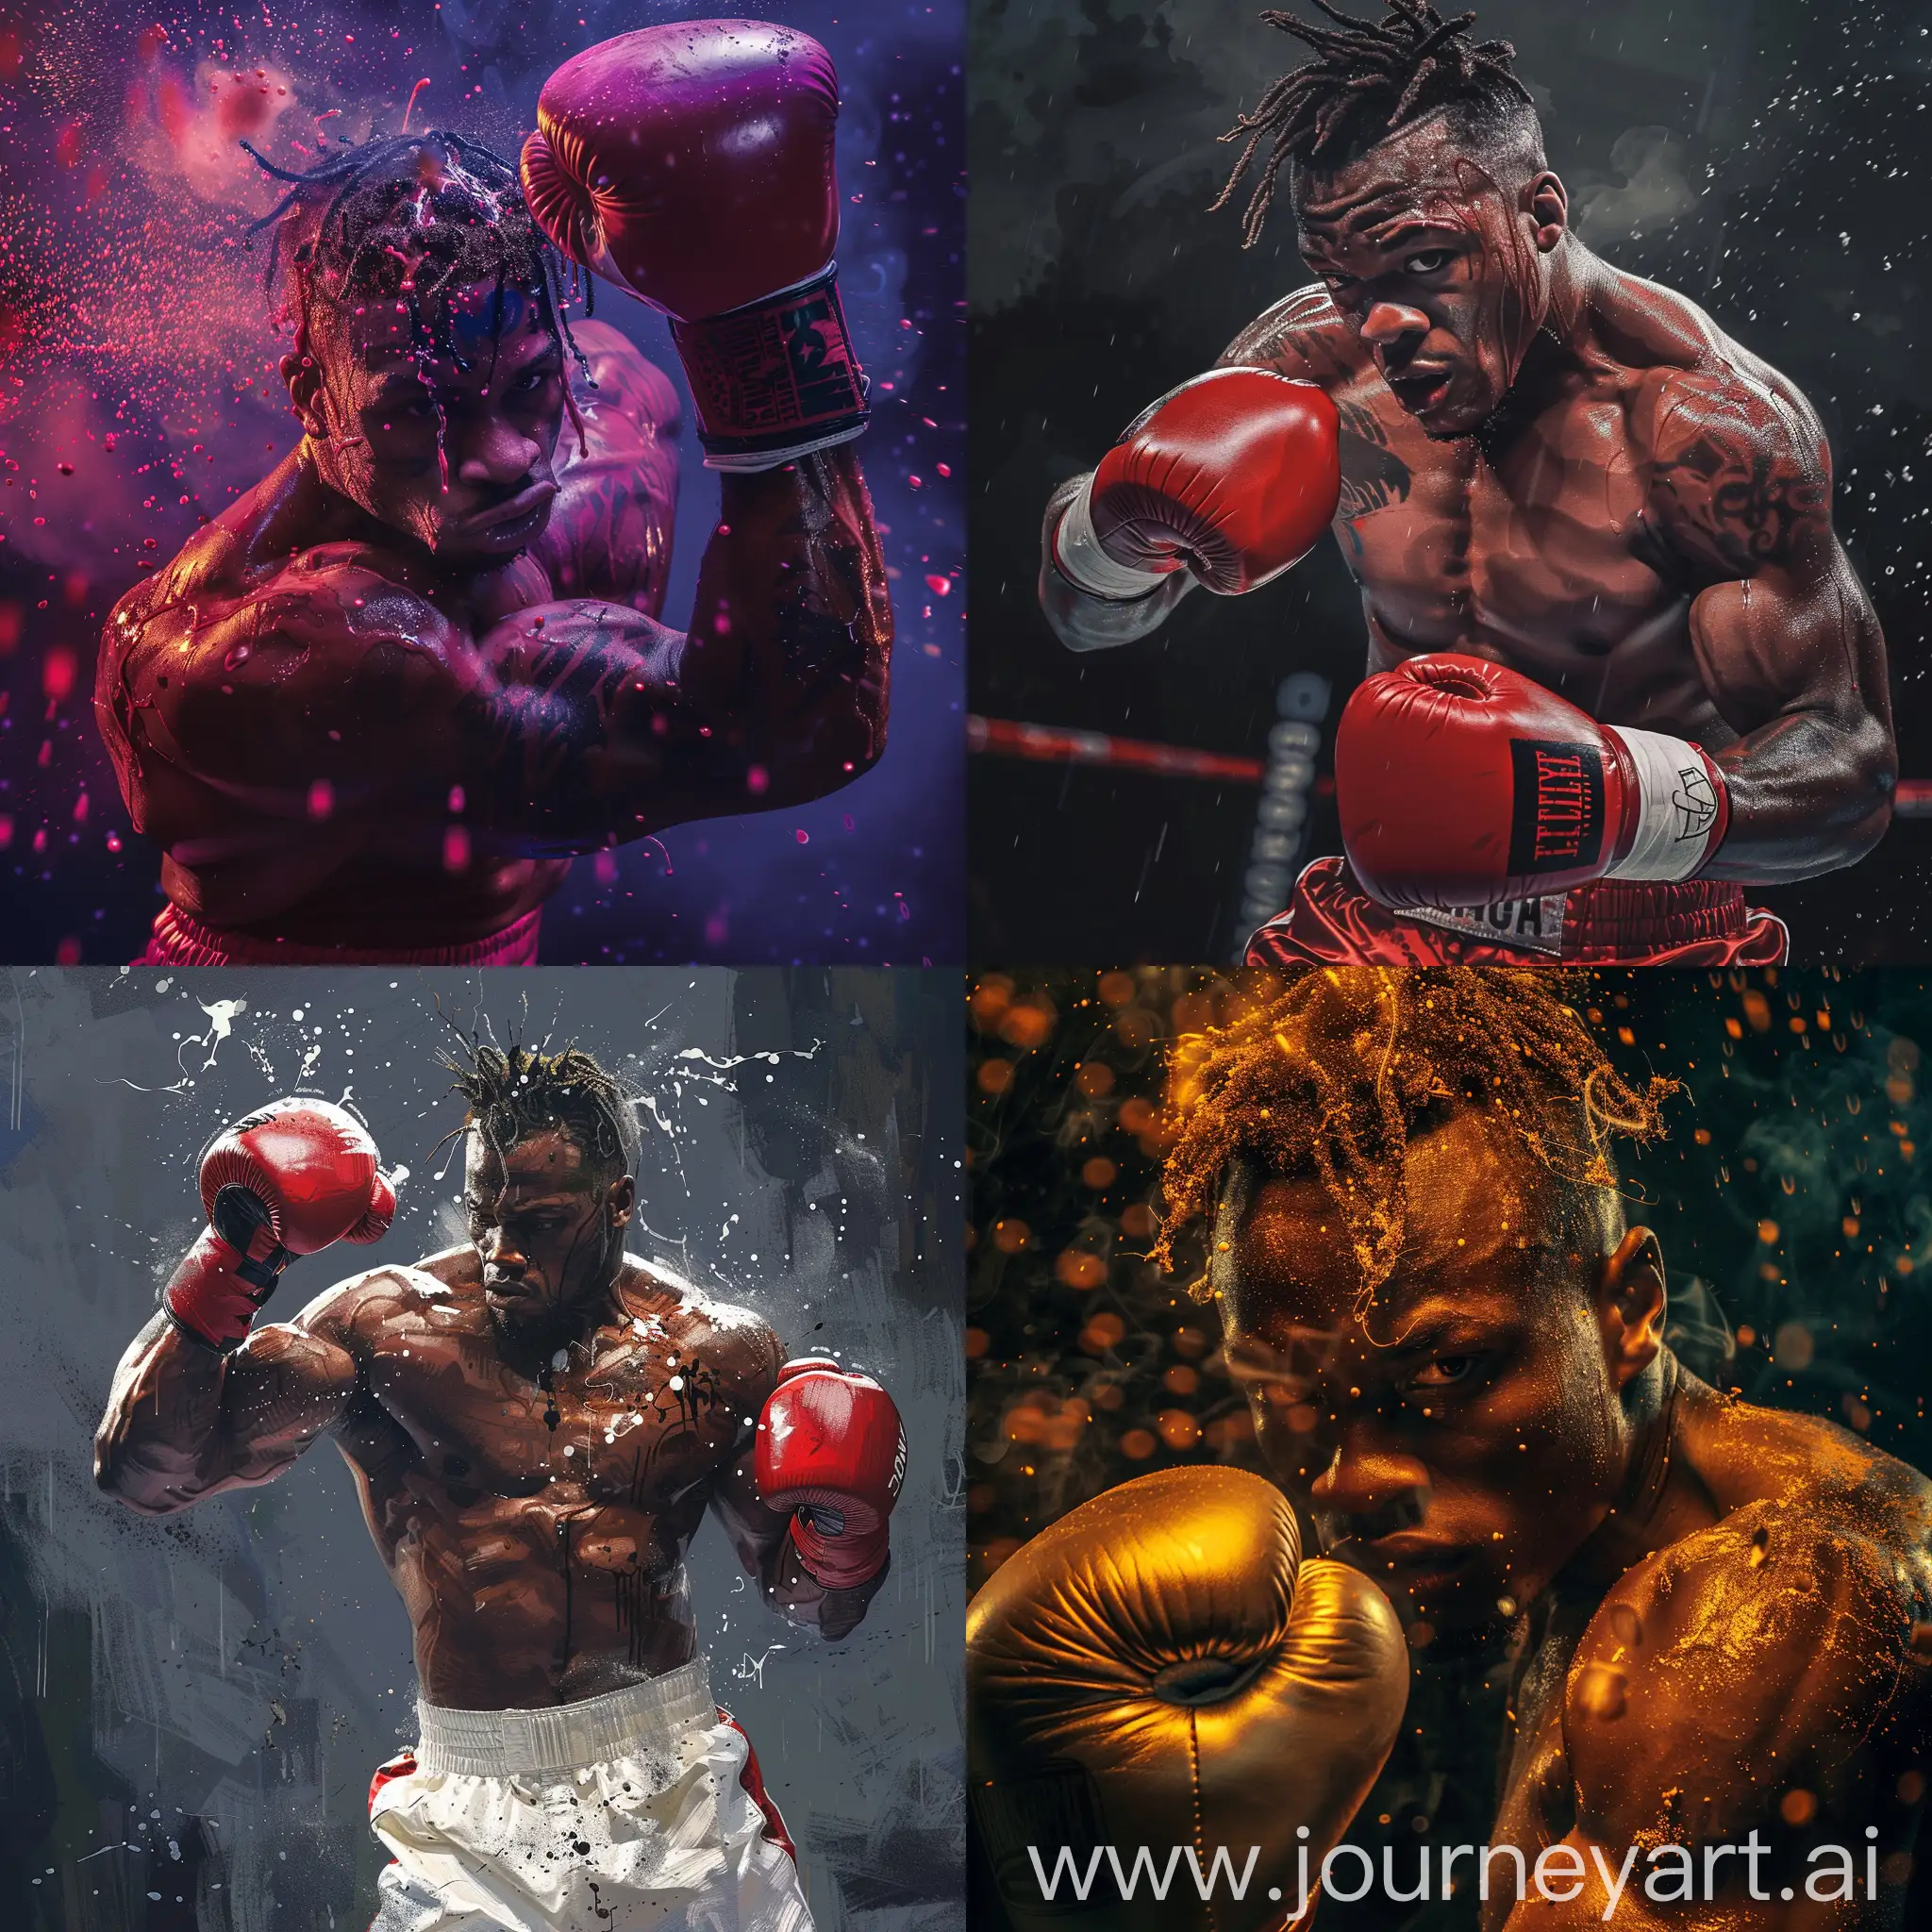 Professional-Boxer-in-Intense-Match-with-Dramatic-Lighting